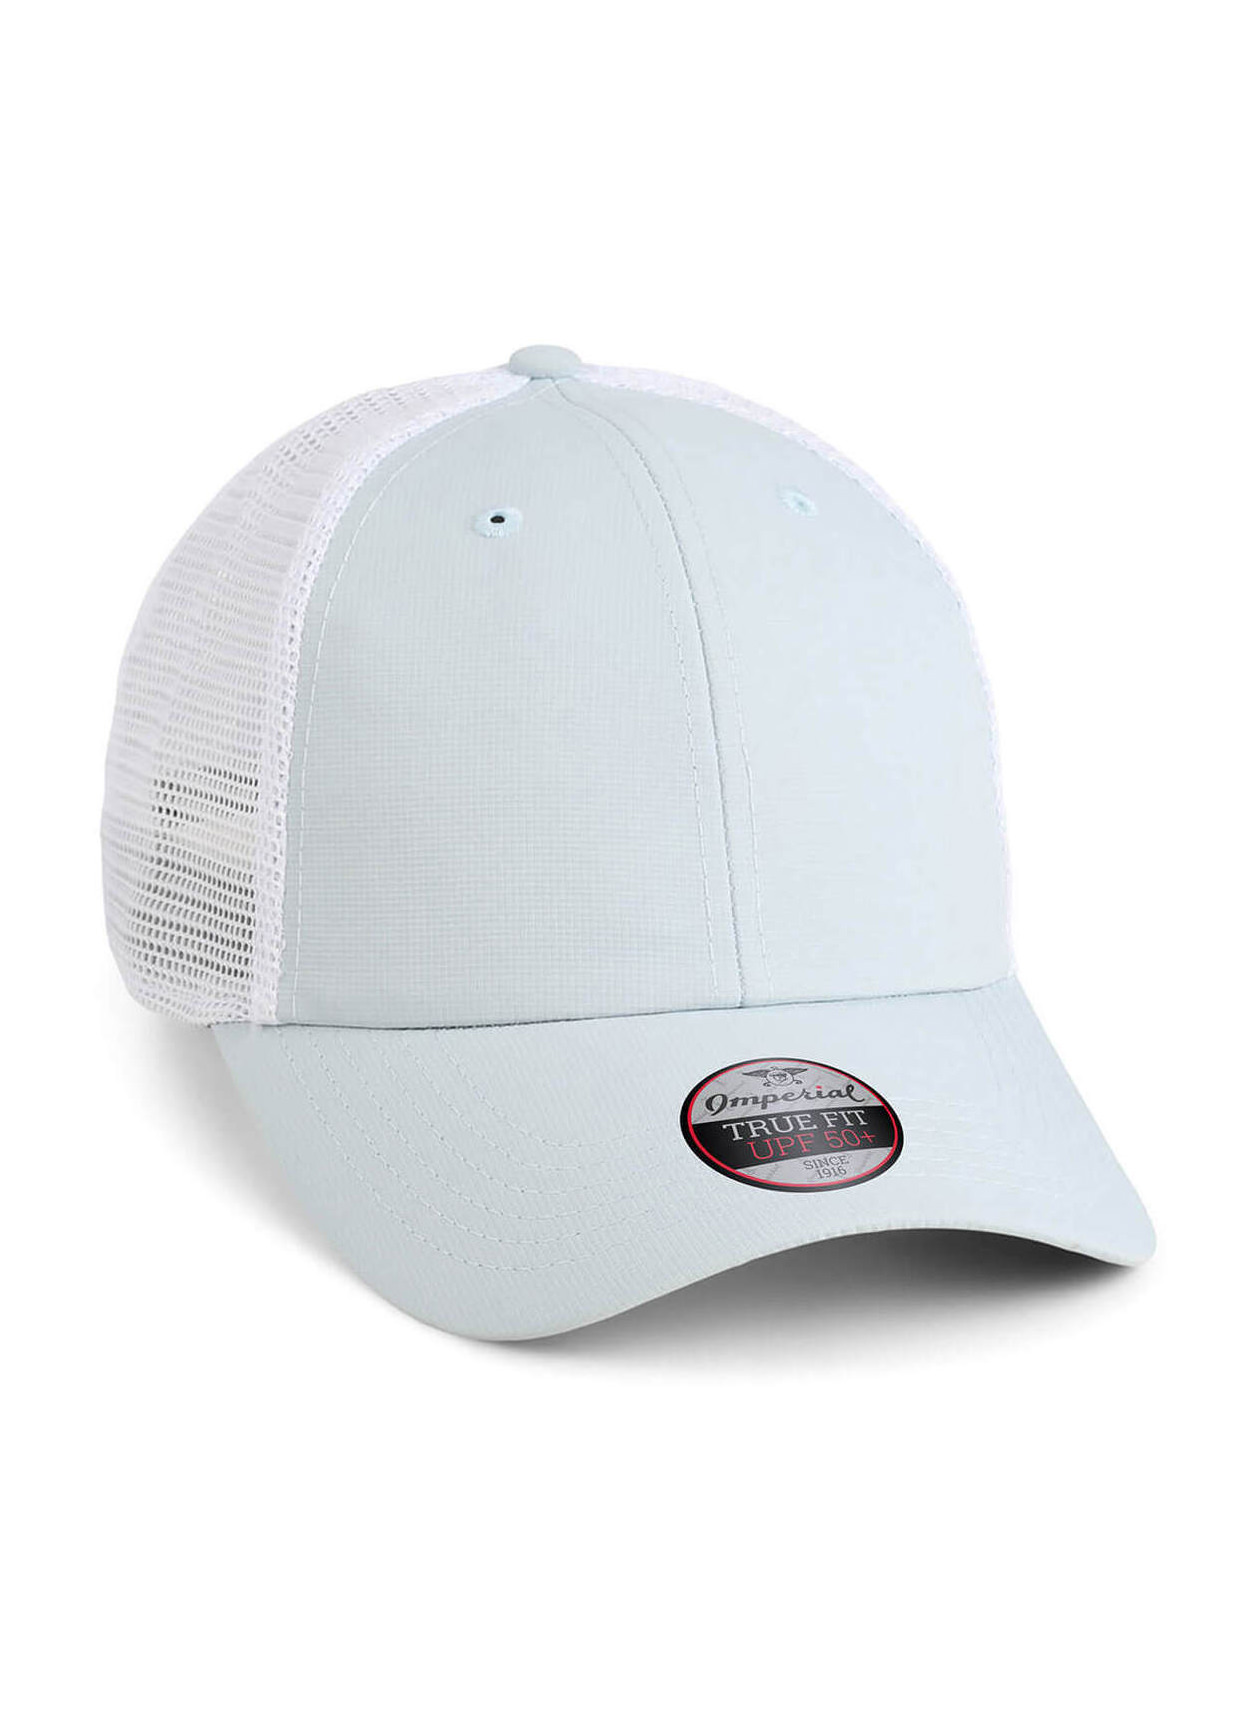 Imperial Glacier / White Structured Performance Meshback Hat